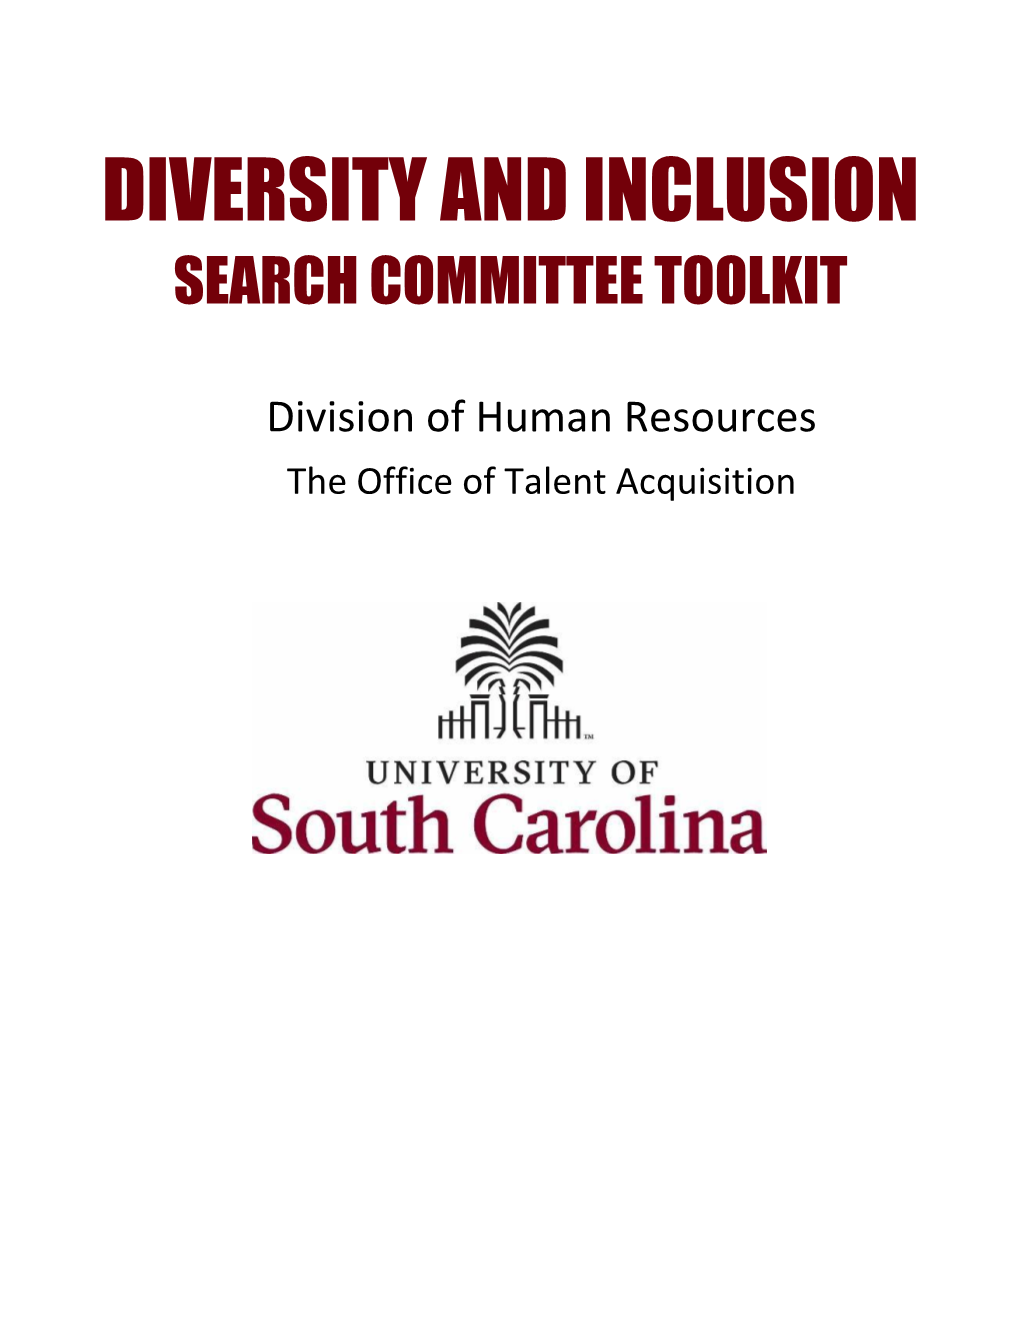 Diversity and Inclusion Search Committee Toolkit